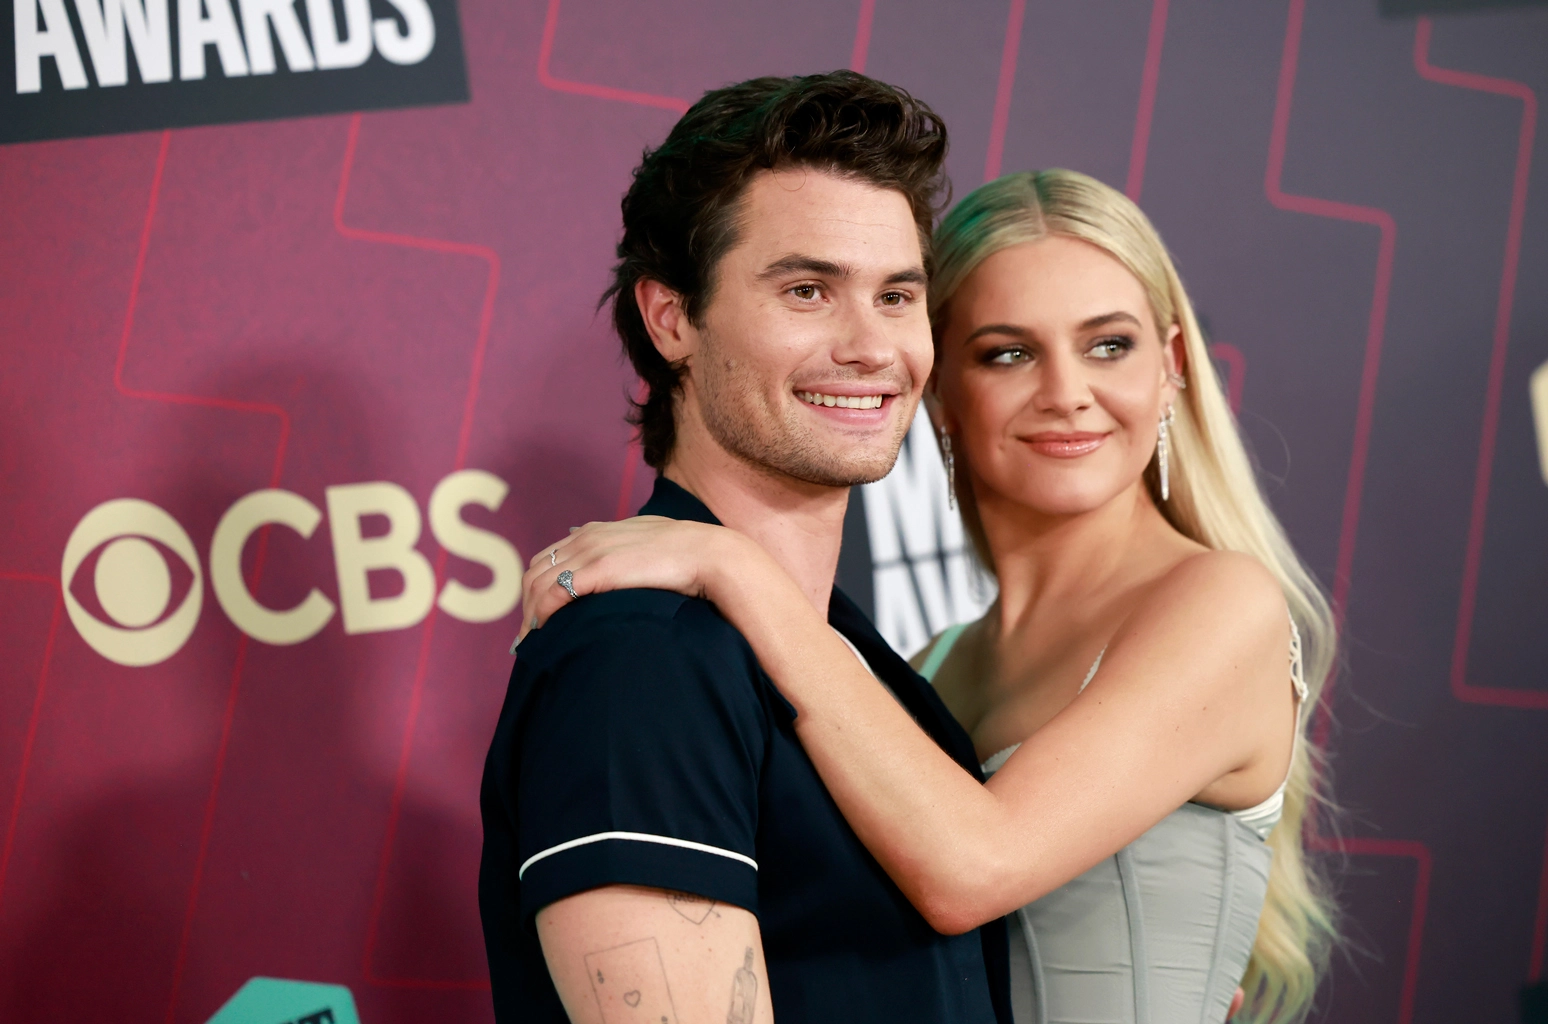 Chase Stokes and Kelsey Ballerini arm in arm at the 2023 CMT Music Awards.